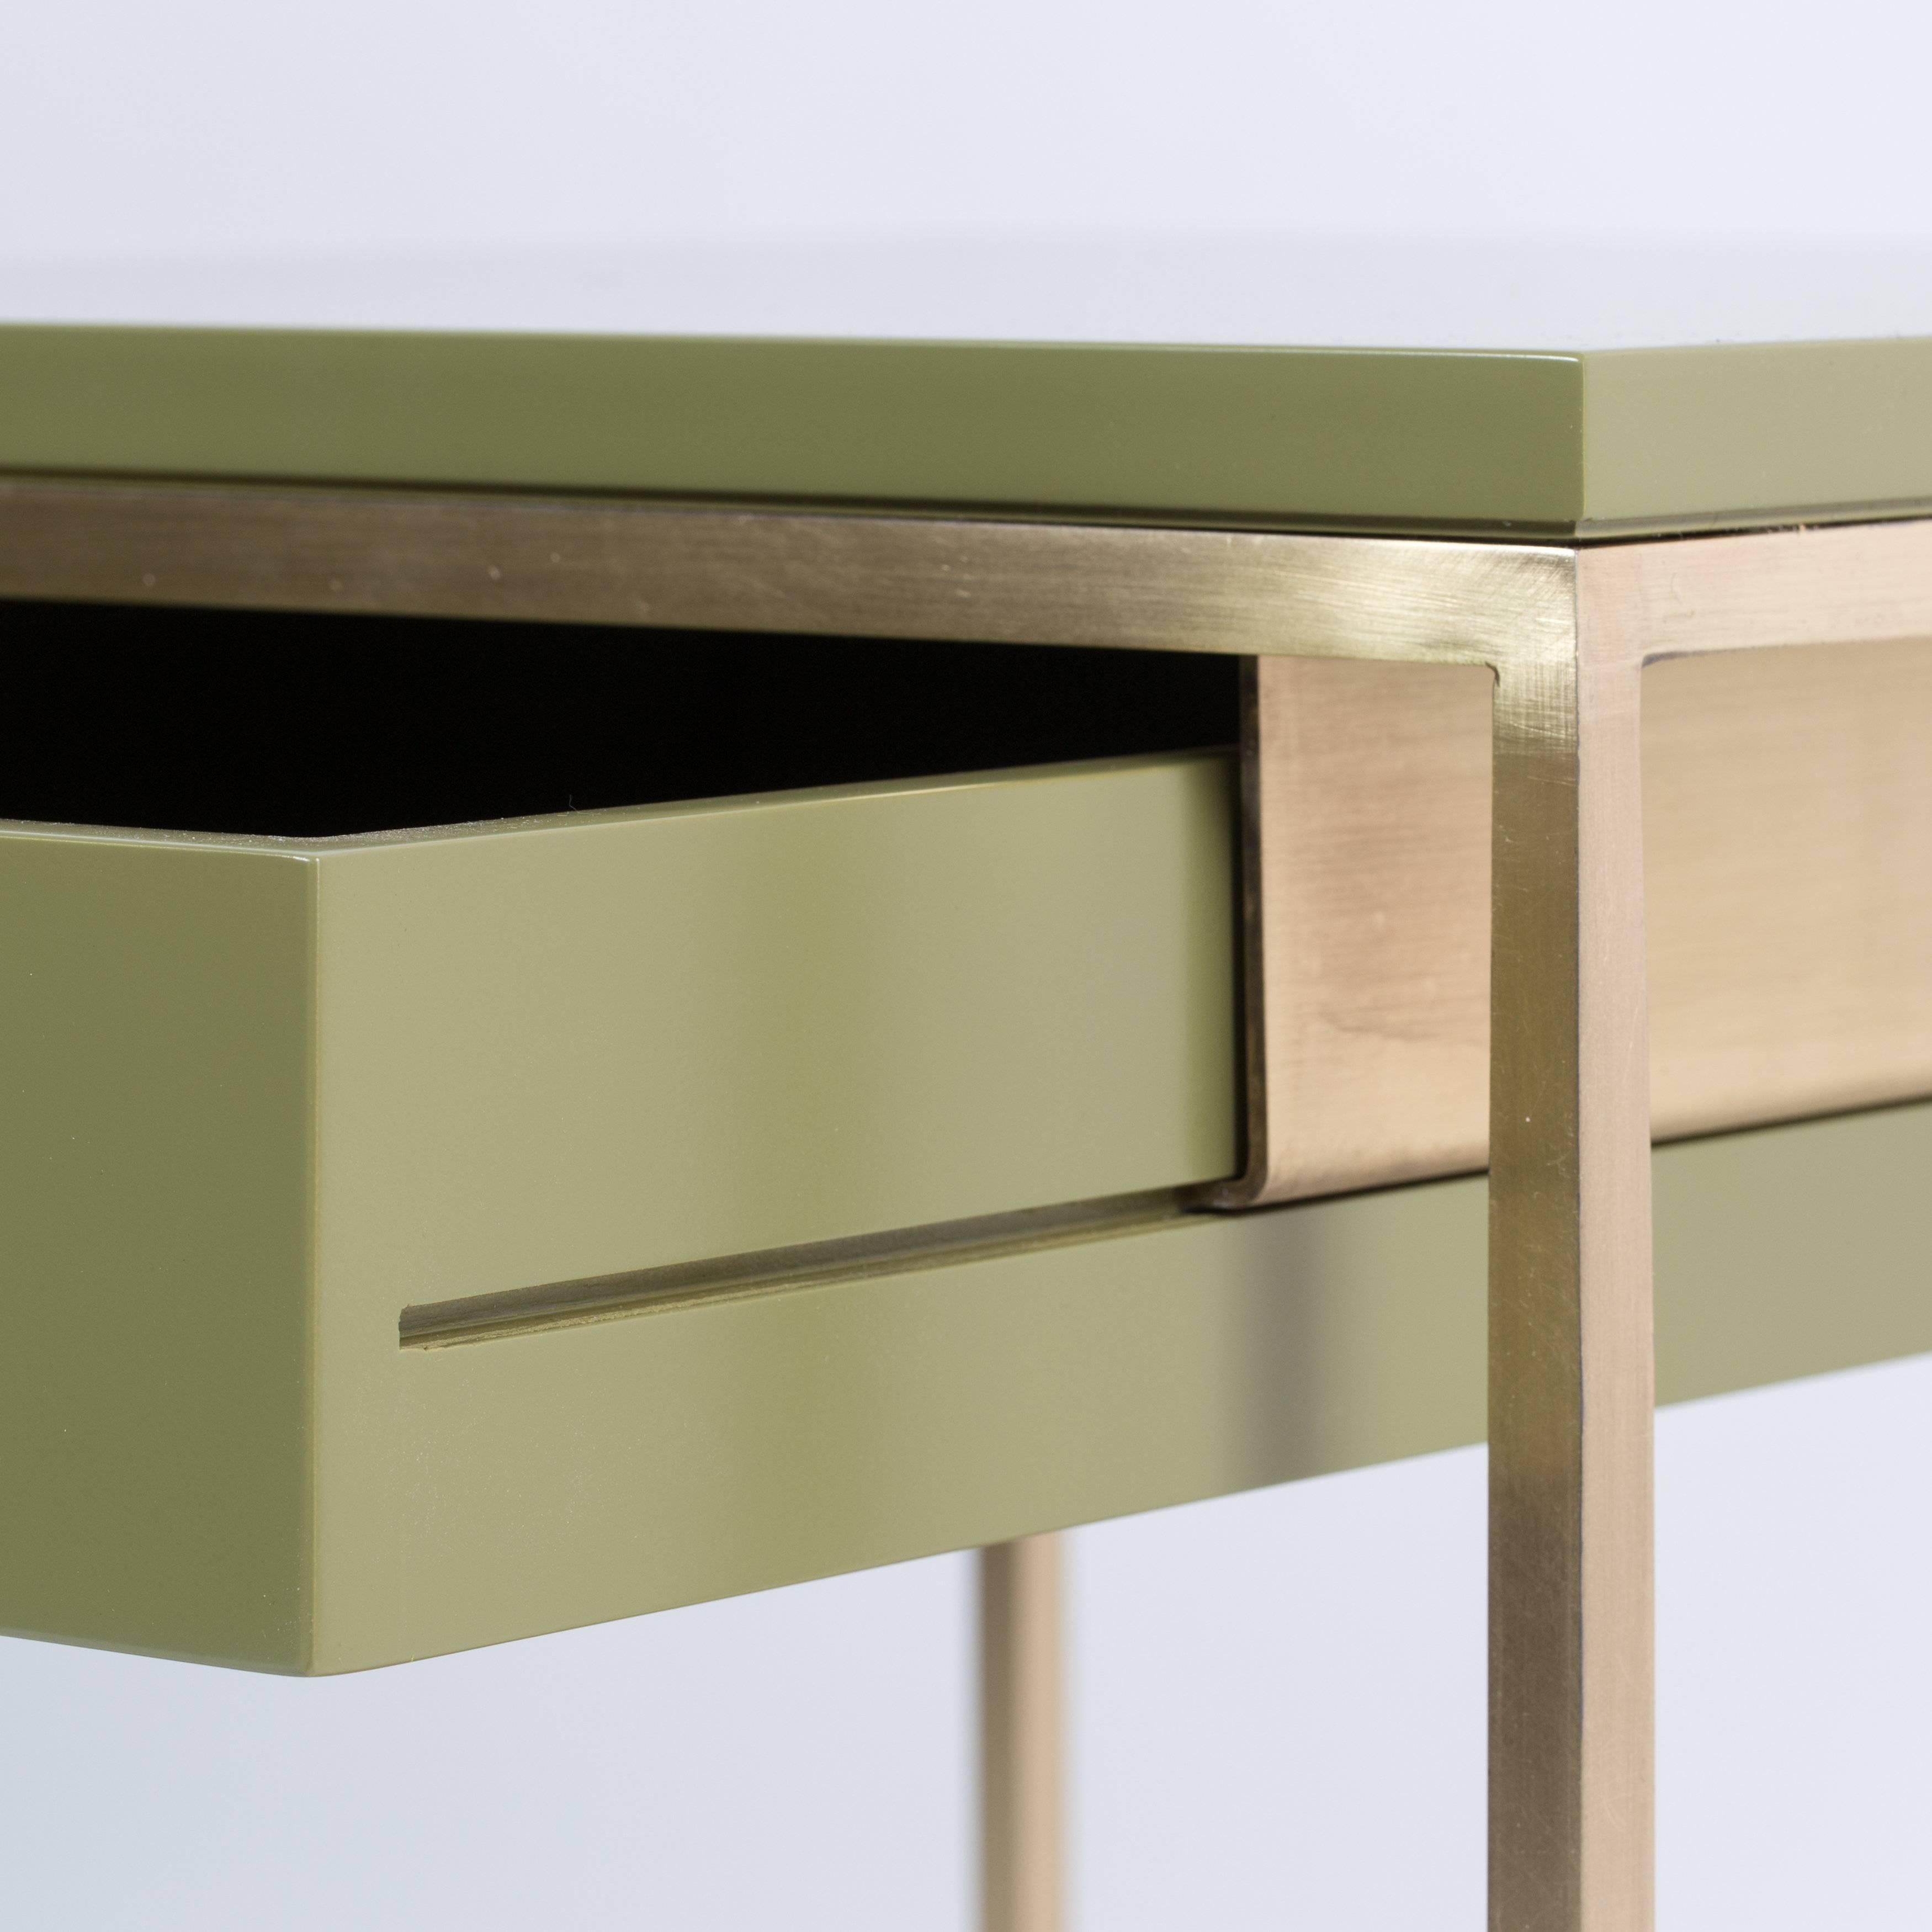 Minimalist Re: 392 Bedside Table in Serpentine Green on Satin Brass frame with Caned shelf